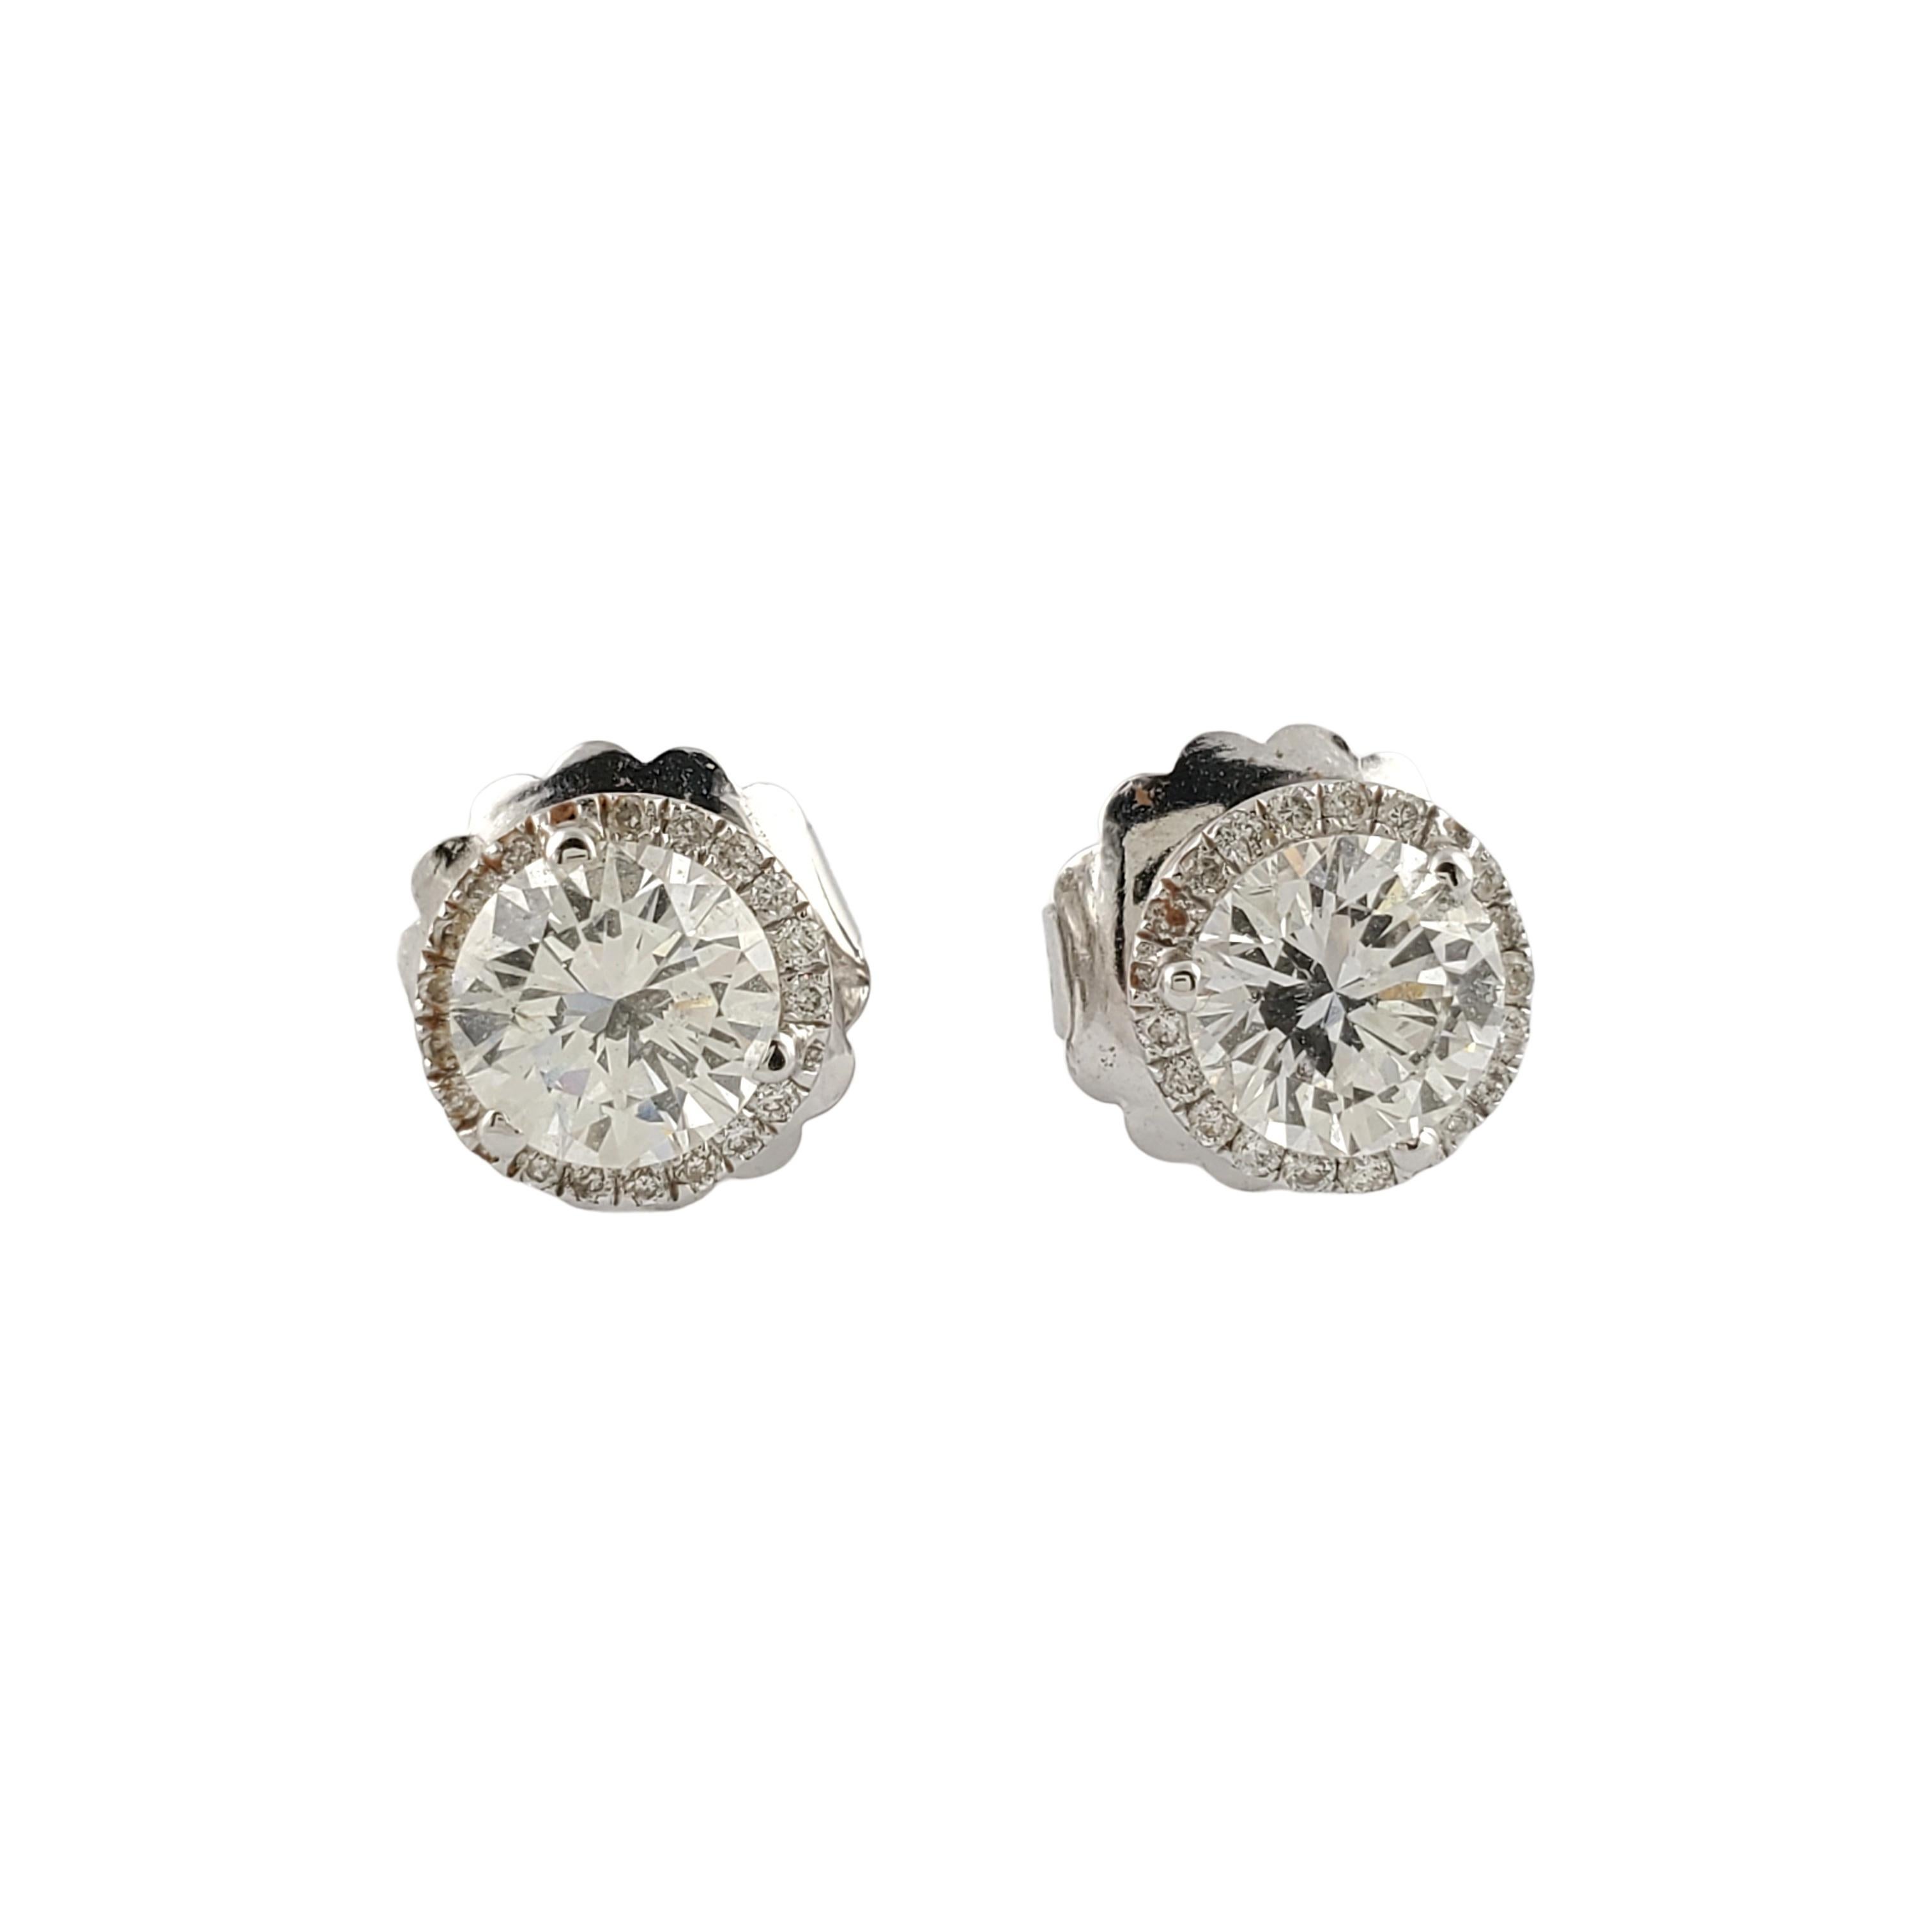 GAI Certified 14K White Gold Diamond Halo Stud Earrings

These gorgeous diamond halo stud earrings are set in 14K white gold

2 round brilliant diamond, approx. .95cts each, are surrounded by a halo of small round brilliant diamonds.
Total diamond